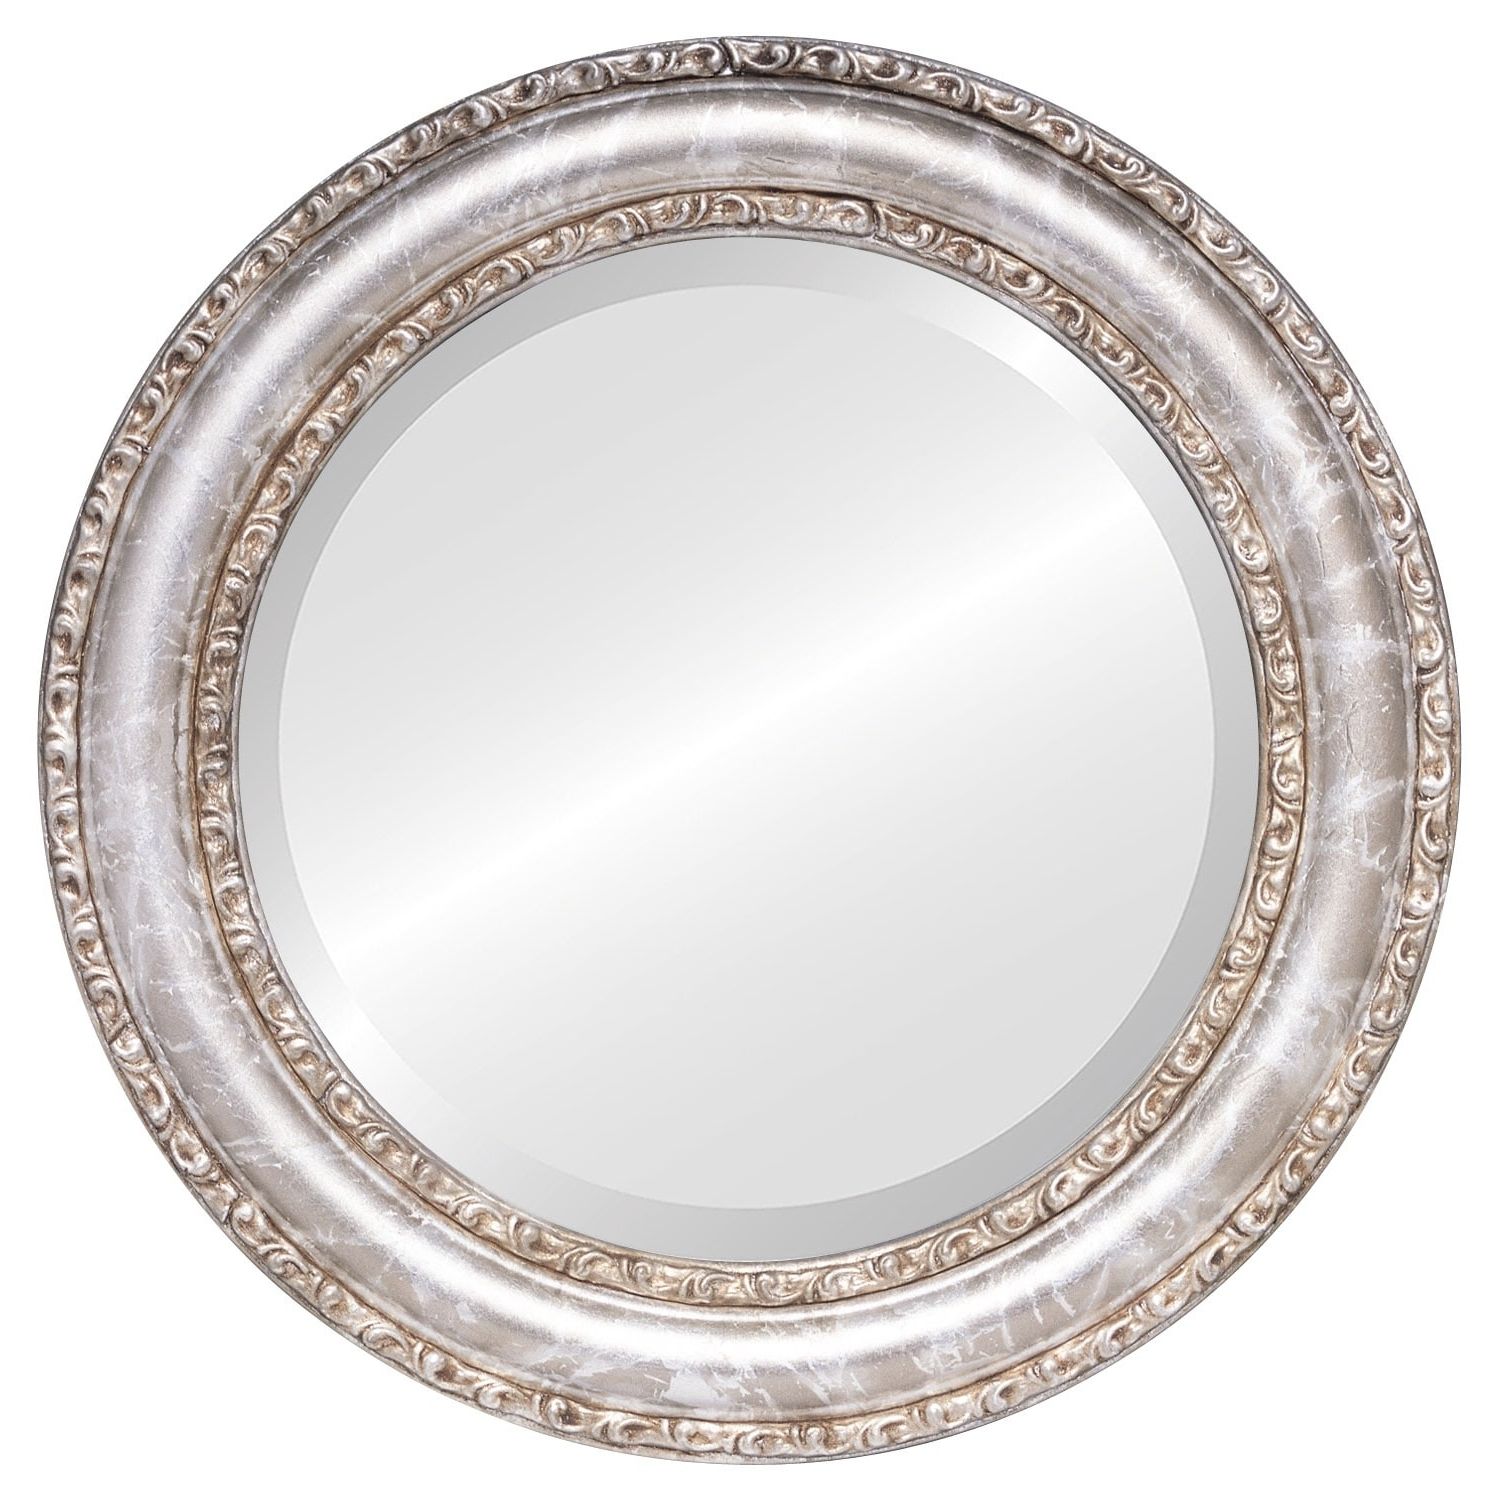 Dorset Framed Round Mirror In Champagne Silver – Antique Antique Silver With Regard To Newest Antique Gold Leaf Round Oversized Wall Mirrors (View 7 of 15)